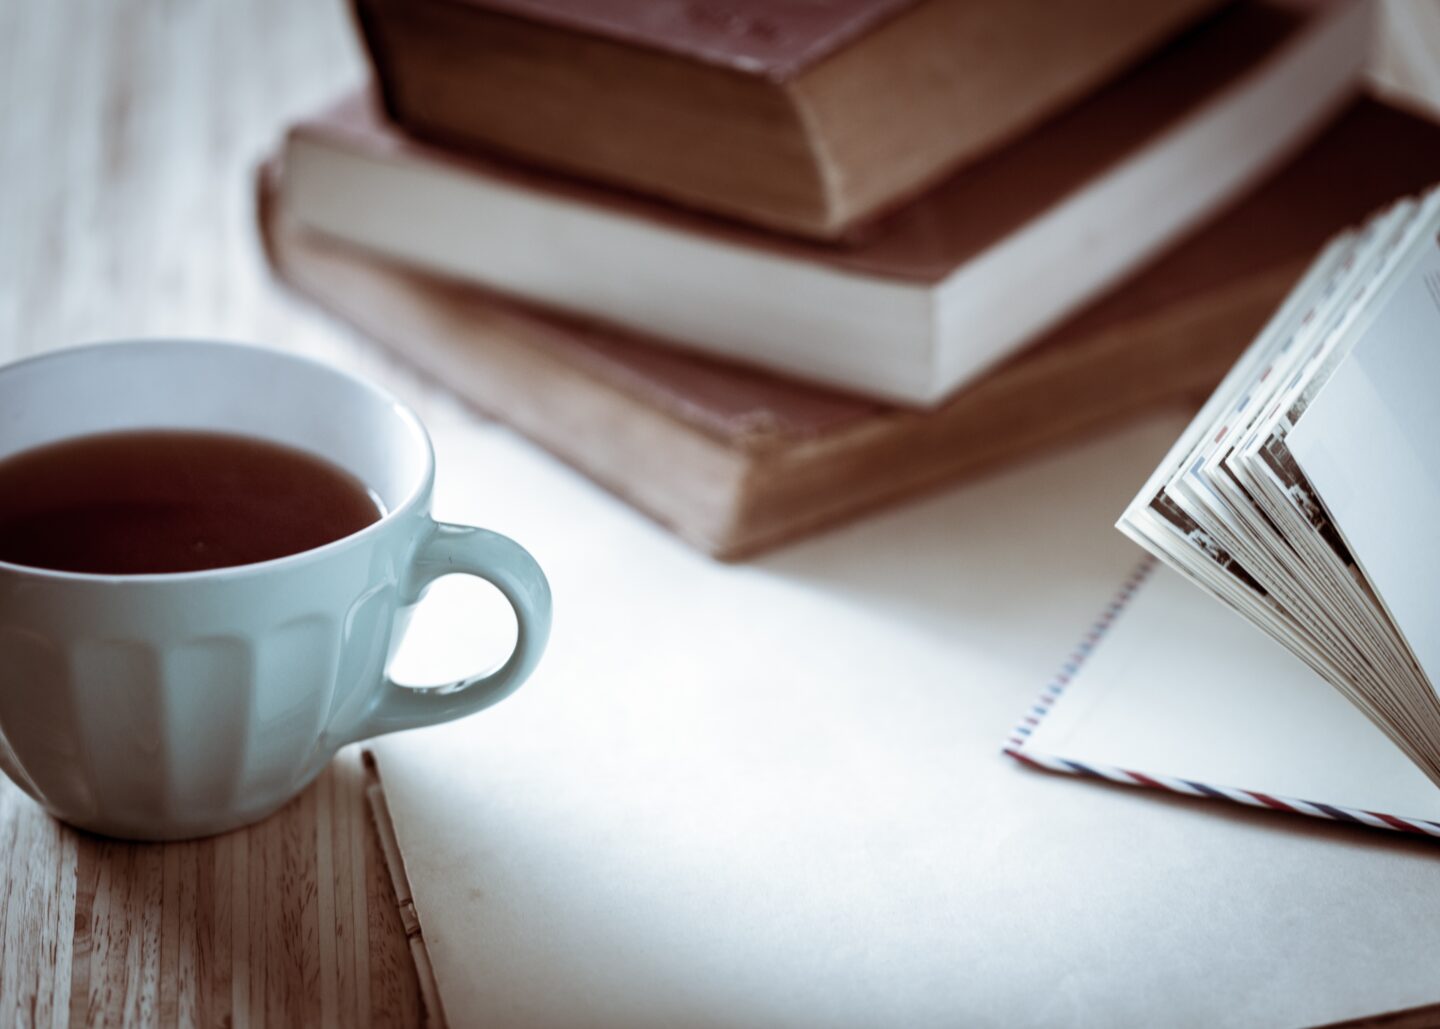 Autumn is for fresh starts. Warm beverages, new books, and journals.